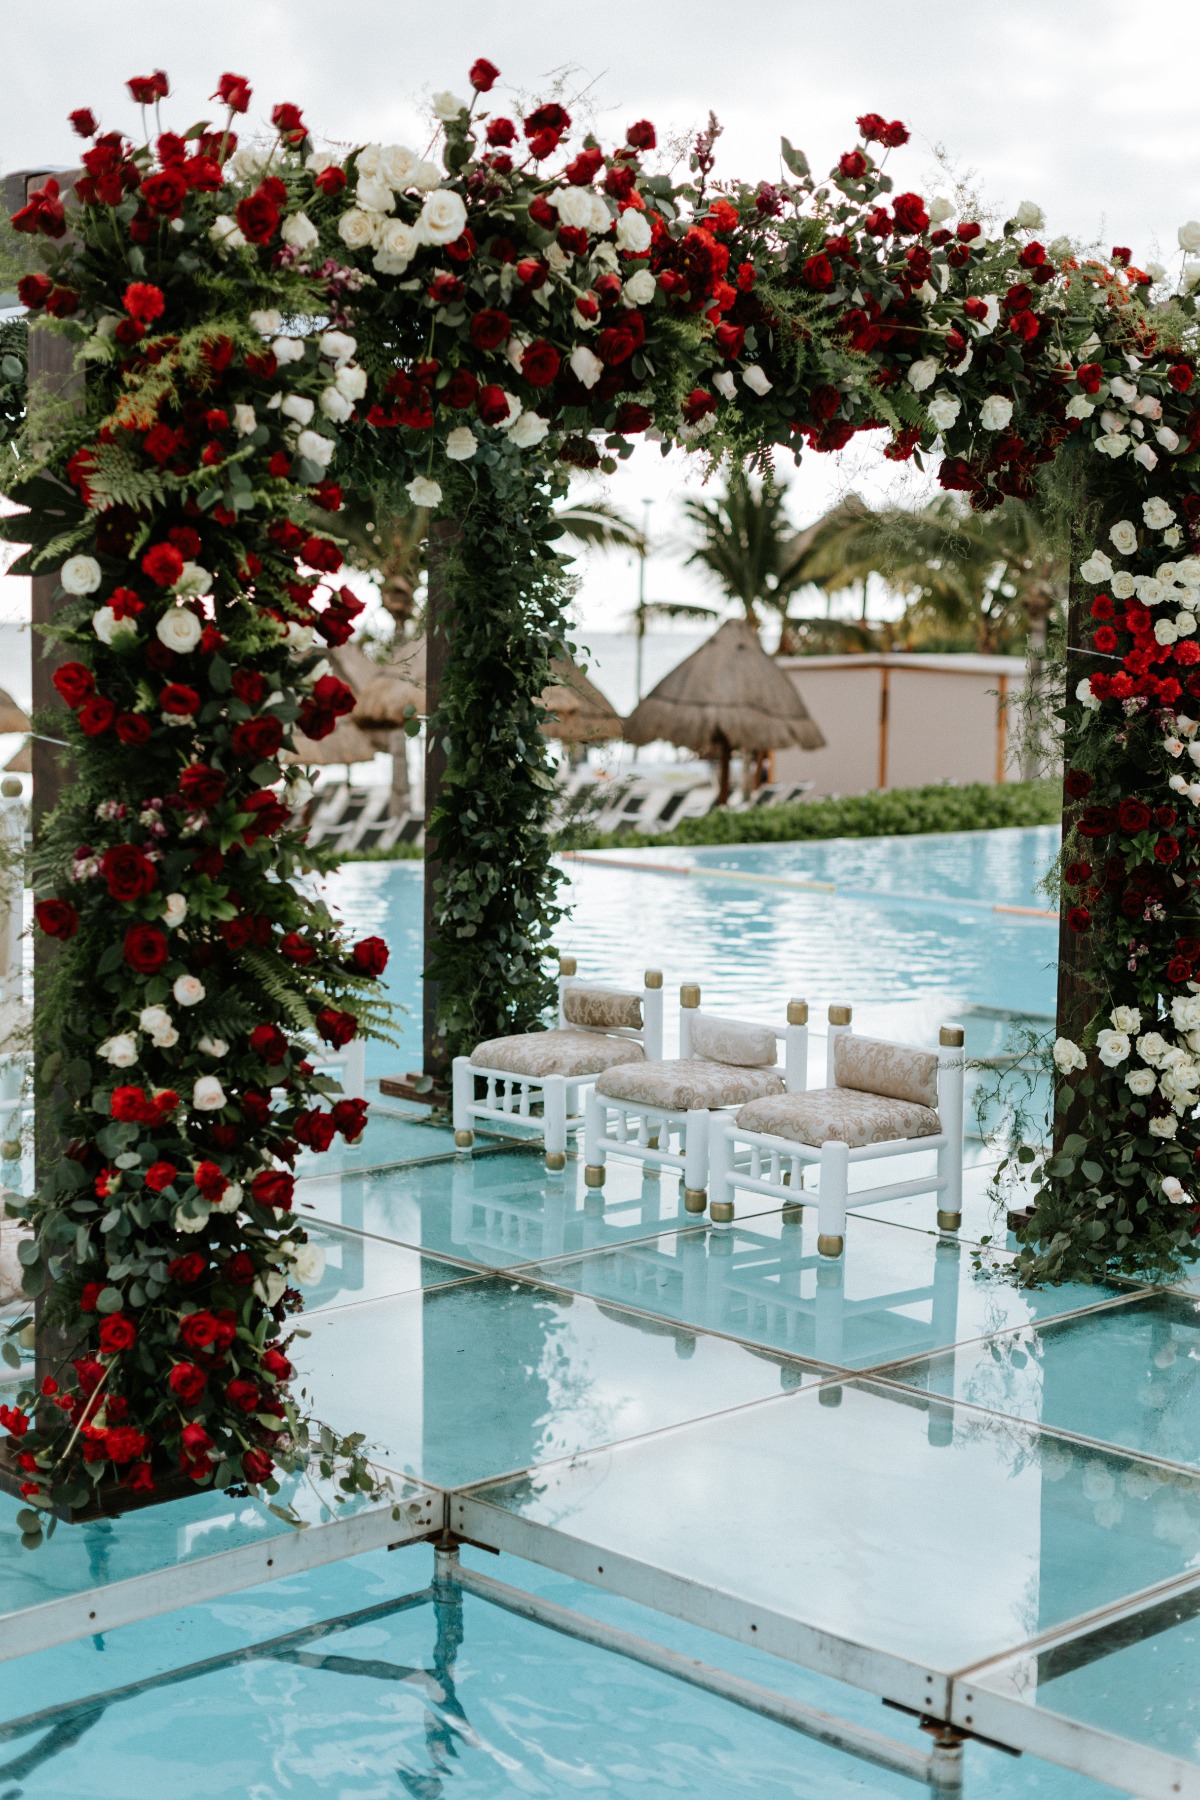 Hindu wedding ceremony with white and red roses over the pool